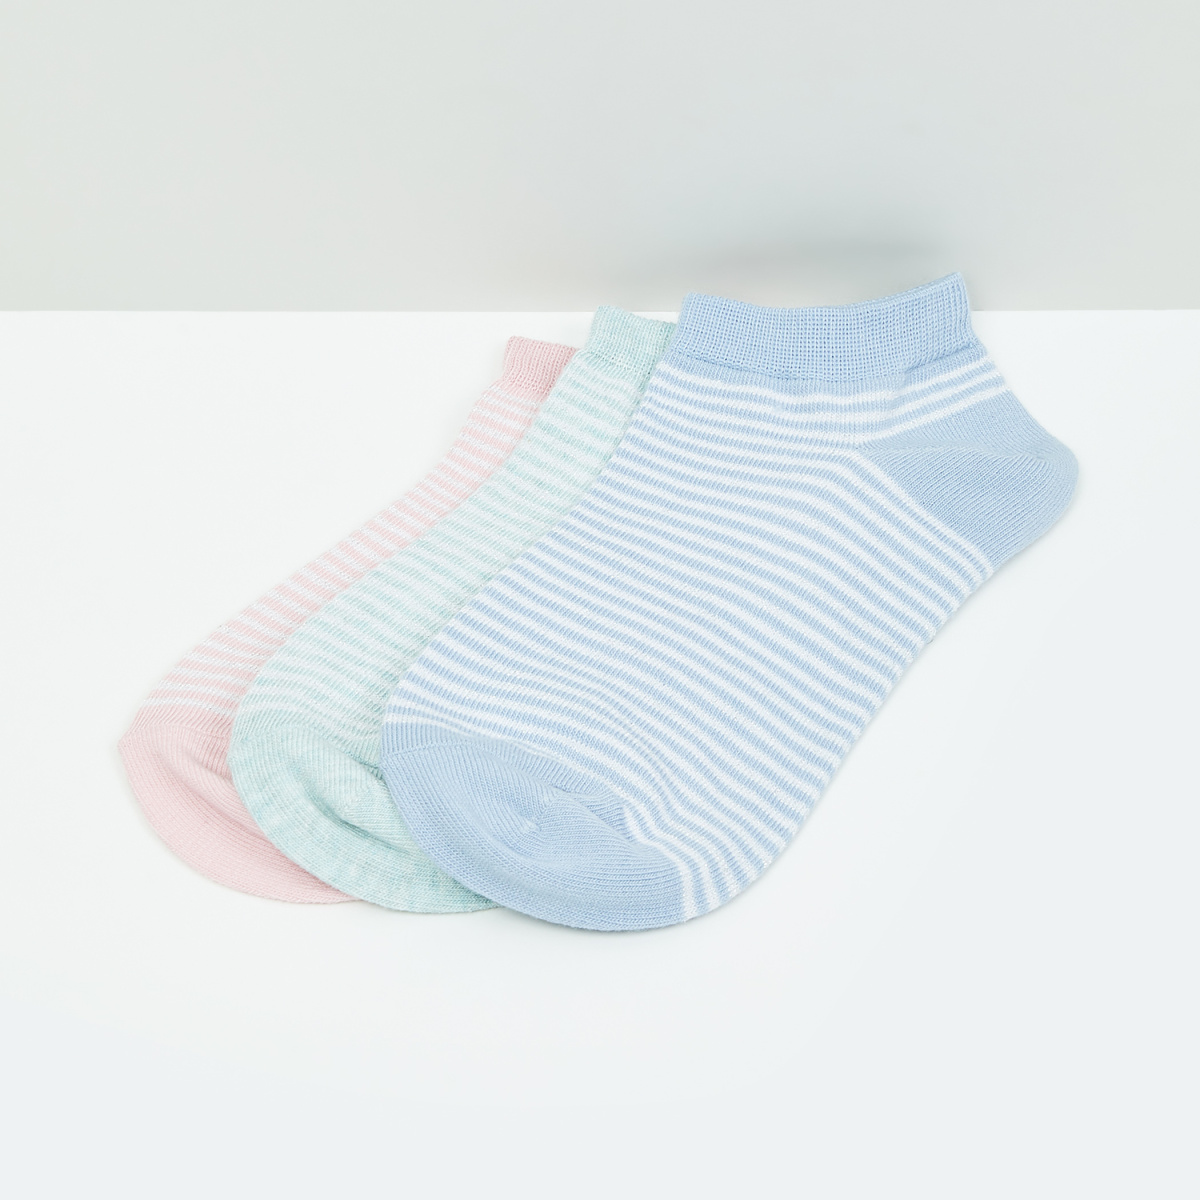 MAX Textured Socks - Pack of 3